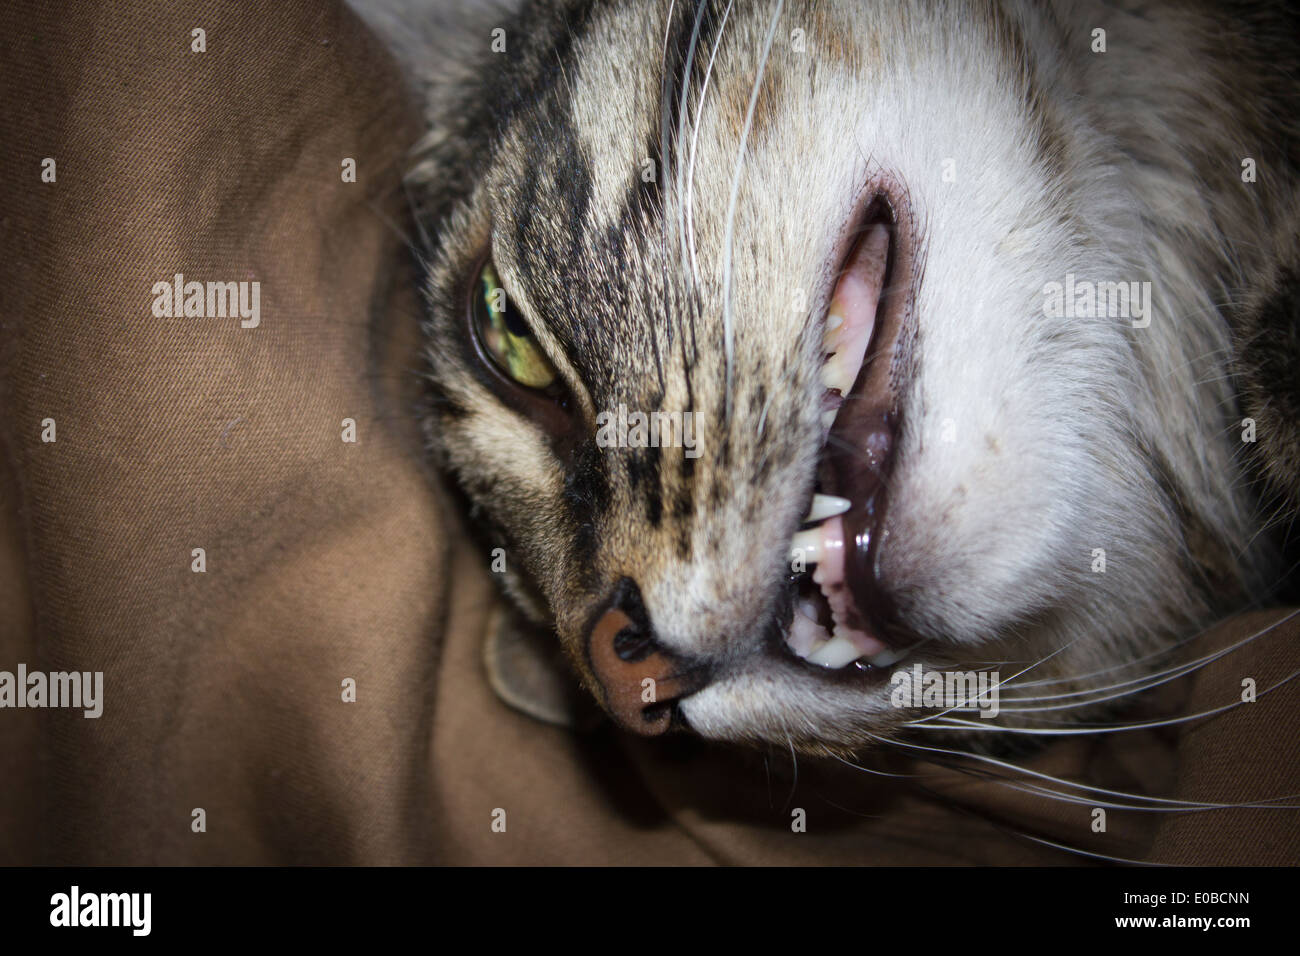 Cat Face Closeup with Teeth Showing Stock Photo